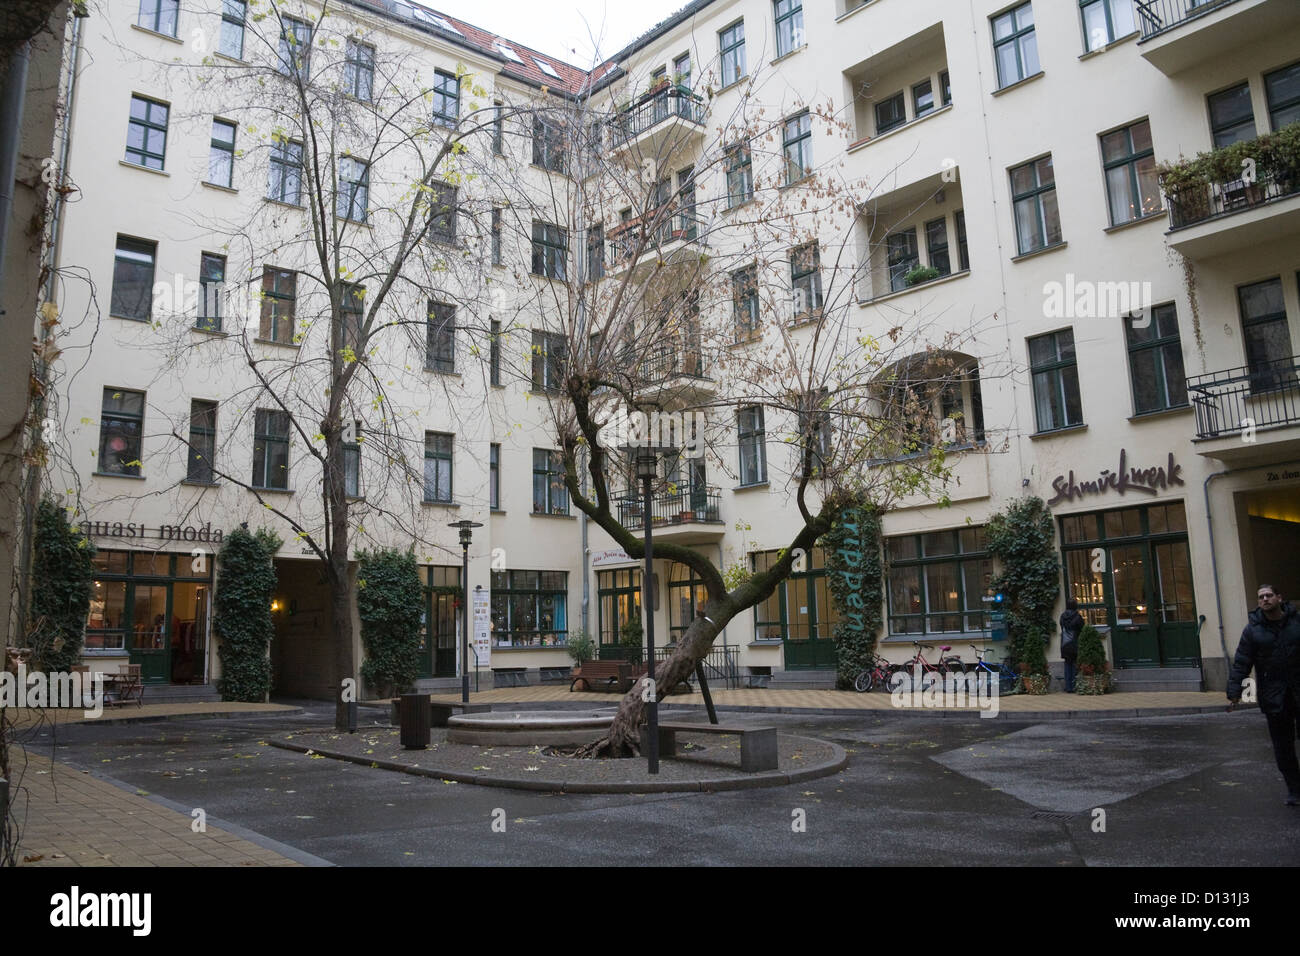 Hackesche Hofe Berlin Germany EU Smartened up and commercialised historic courtyards contain art galleries workshops and cafes Stock Photo